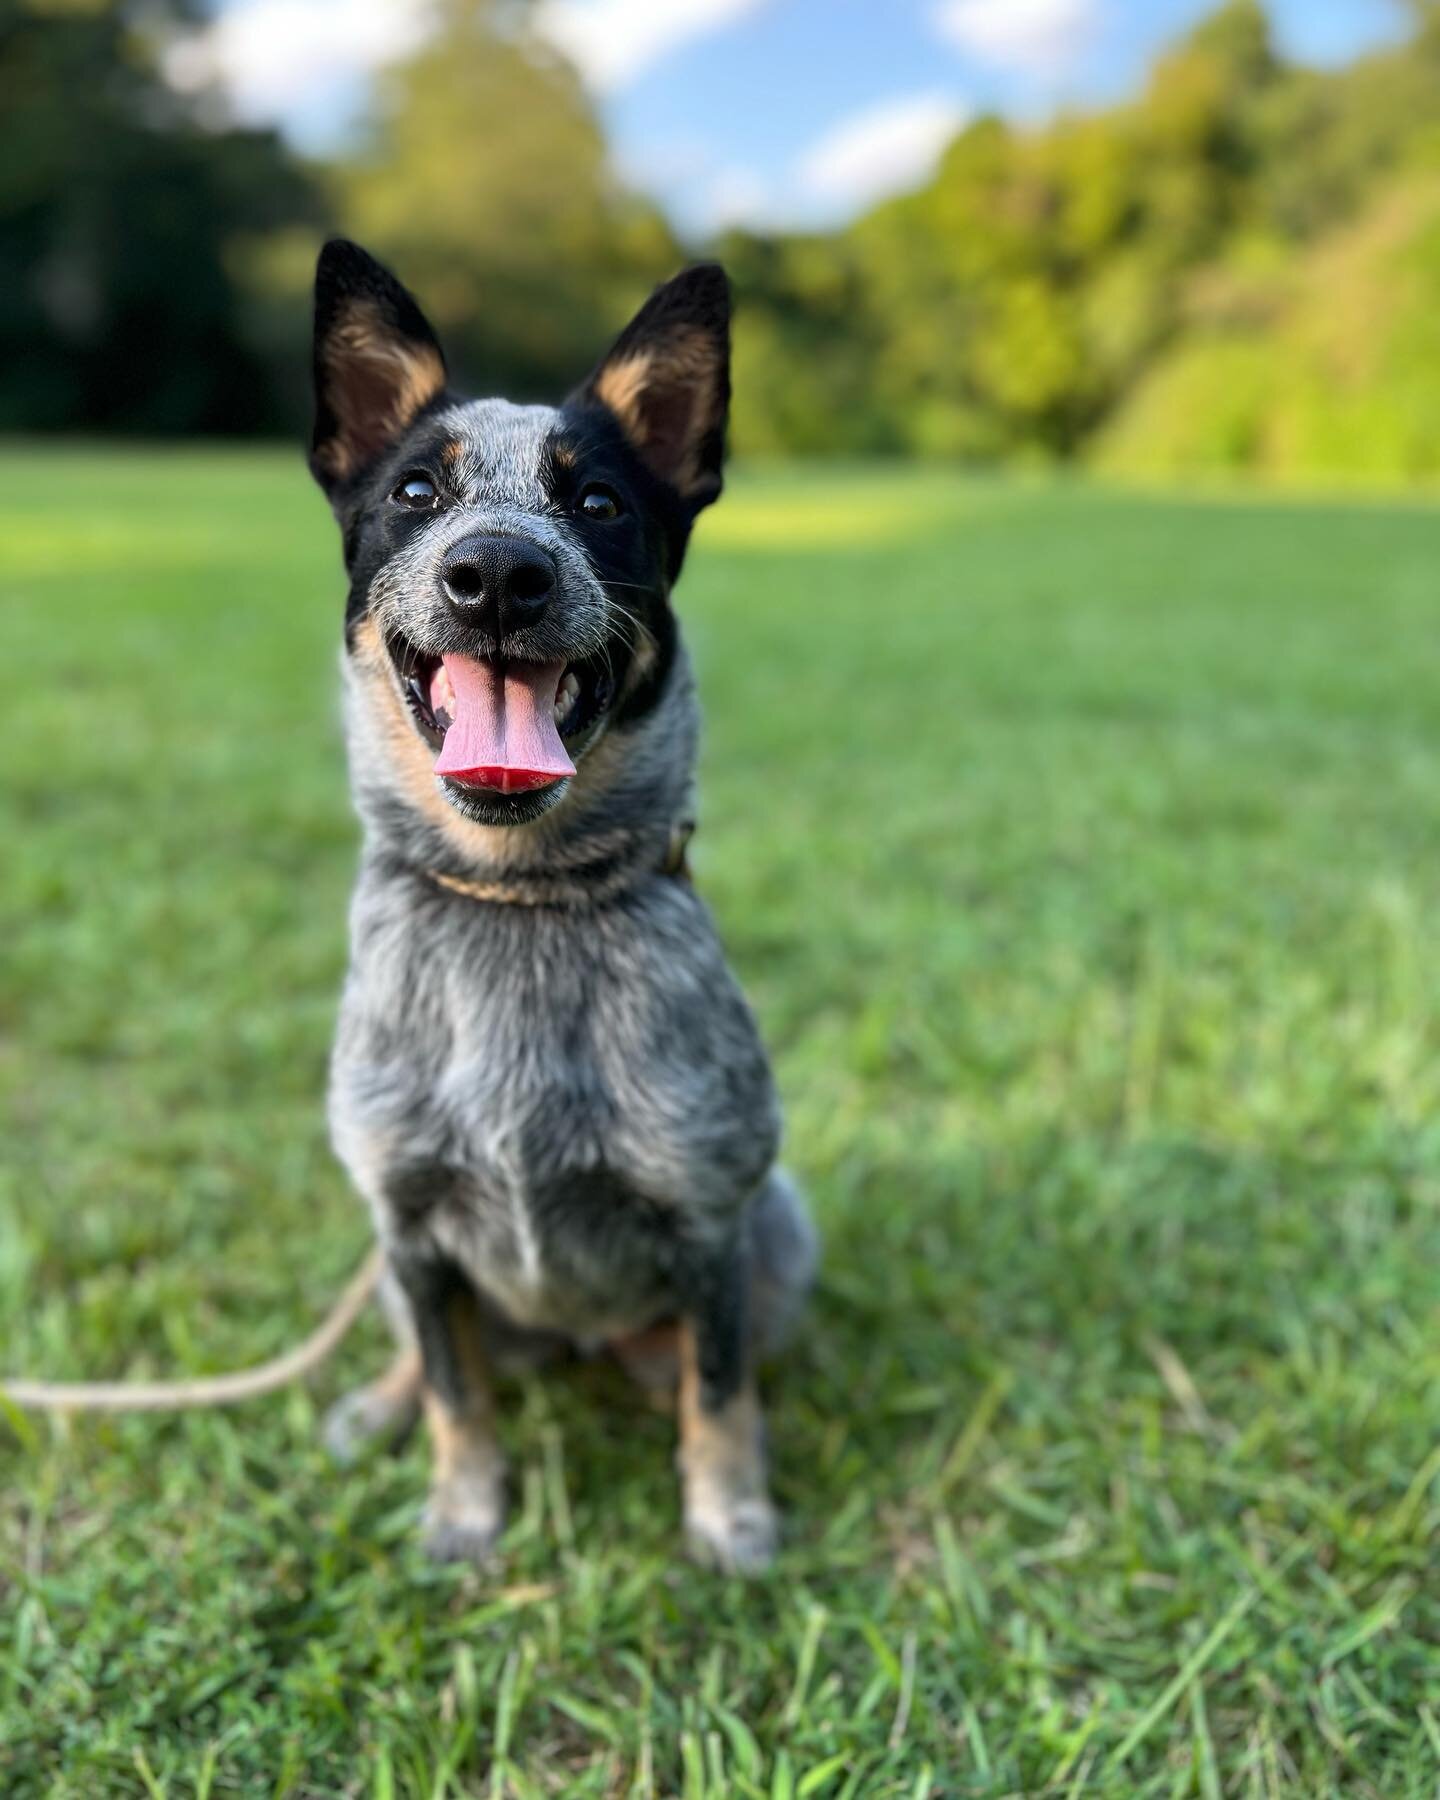 Everybody welcome Ellie! She&rsquo;s a 5 month old cattle dog here for our 2 week puppy program. We&rsquo;ll be mainly focusing on confidence building, socialization, and obedience foundations. Once Ellie gets to know you, she is just the sweetest mo